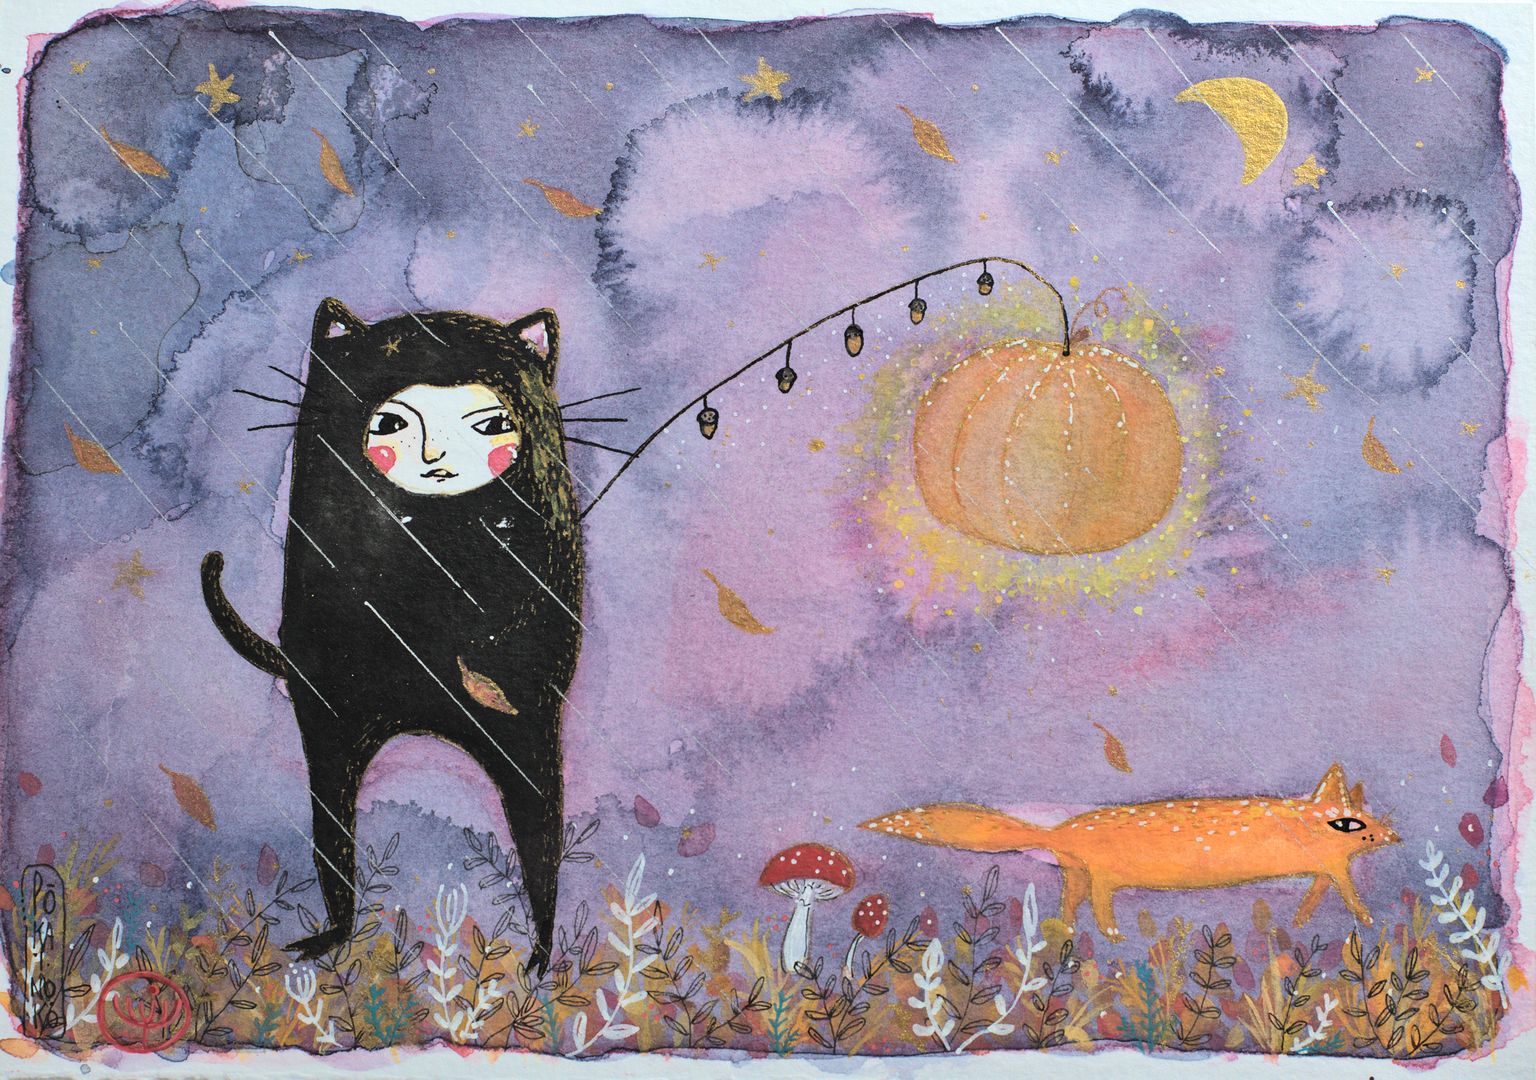 autumnal ink painting of a character wearing a black cat costume, holding a pumpkin lantern, beside a fox, with a background of rainy purple night, golden moon, autumn leaves, mushrooms and plants